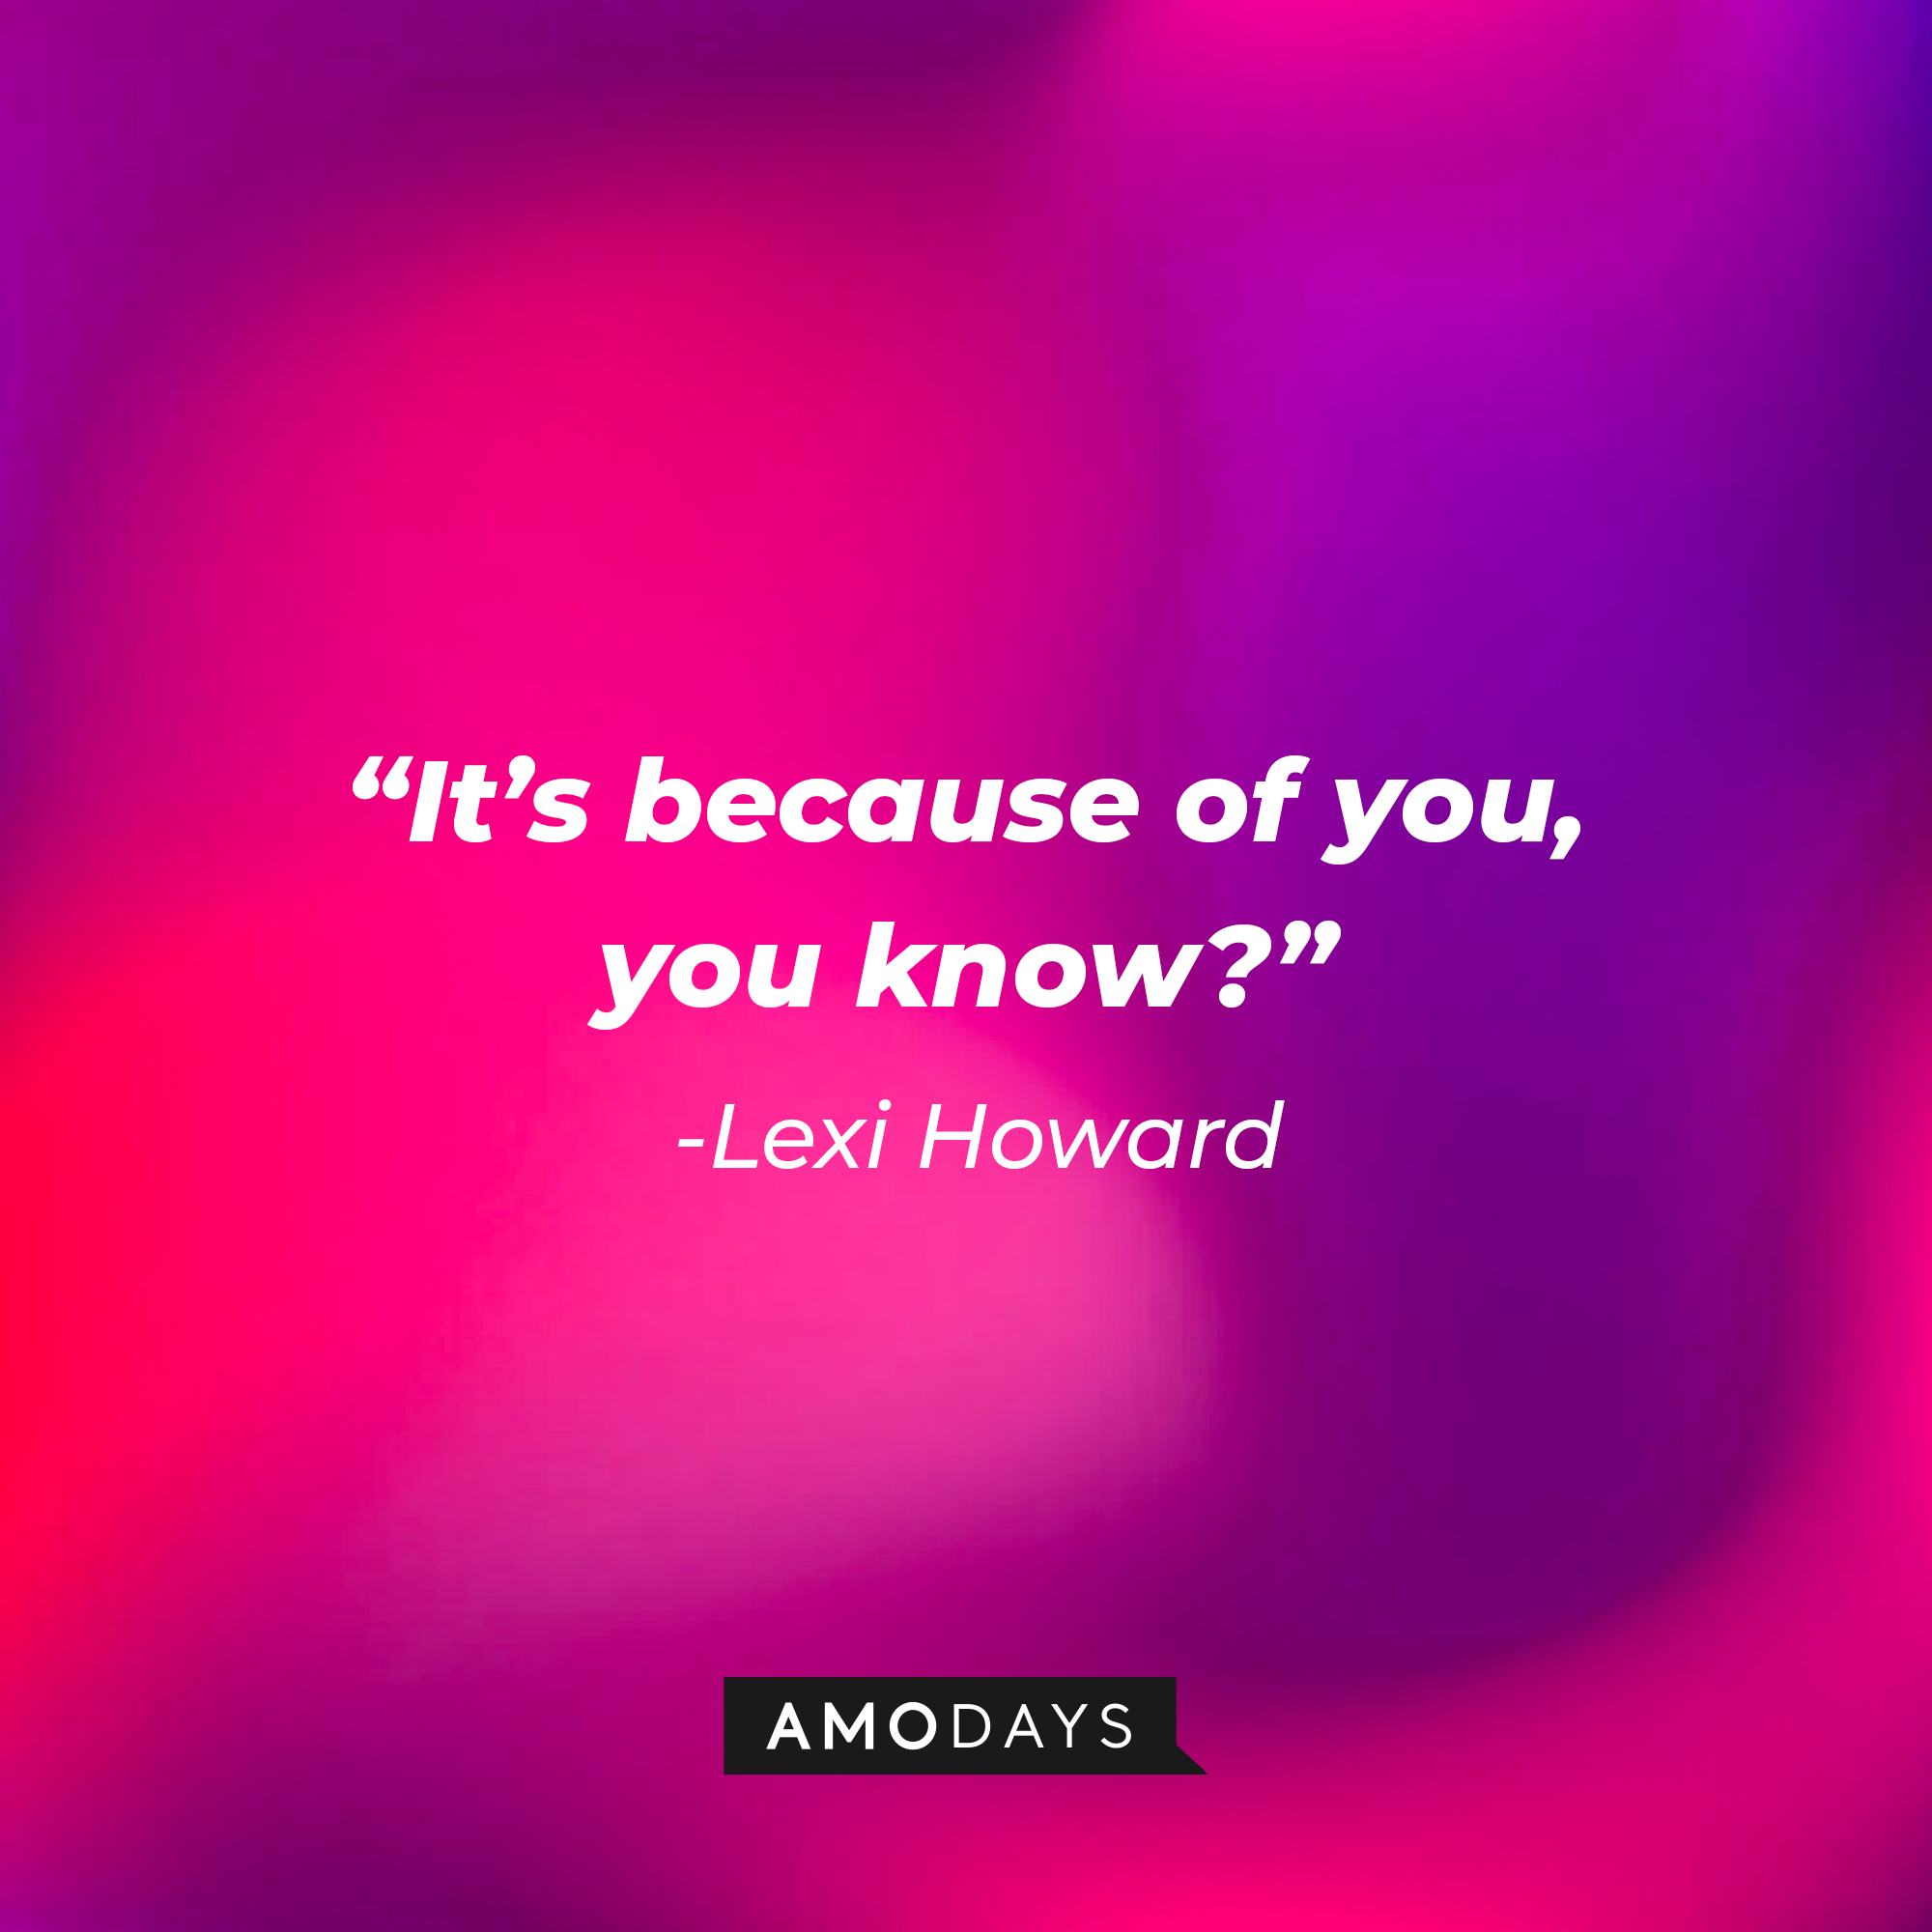 Lexi Howard’s quote: “It’s because of you, you know?” | Source: AmoDays